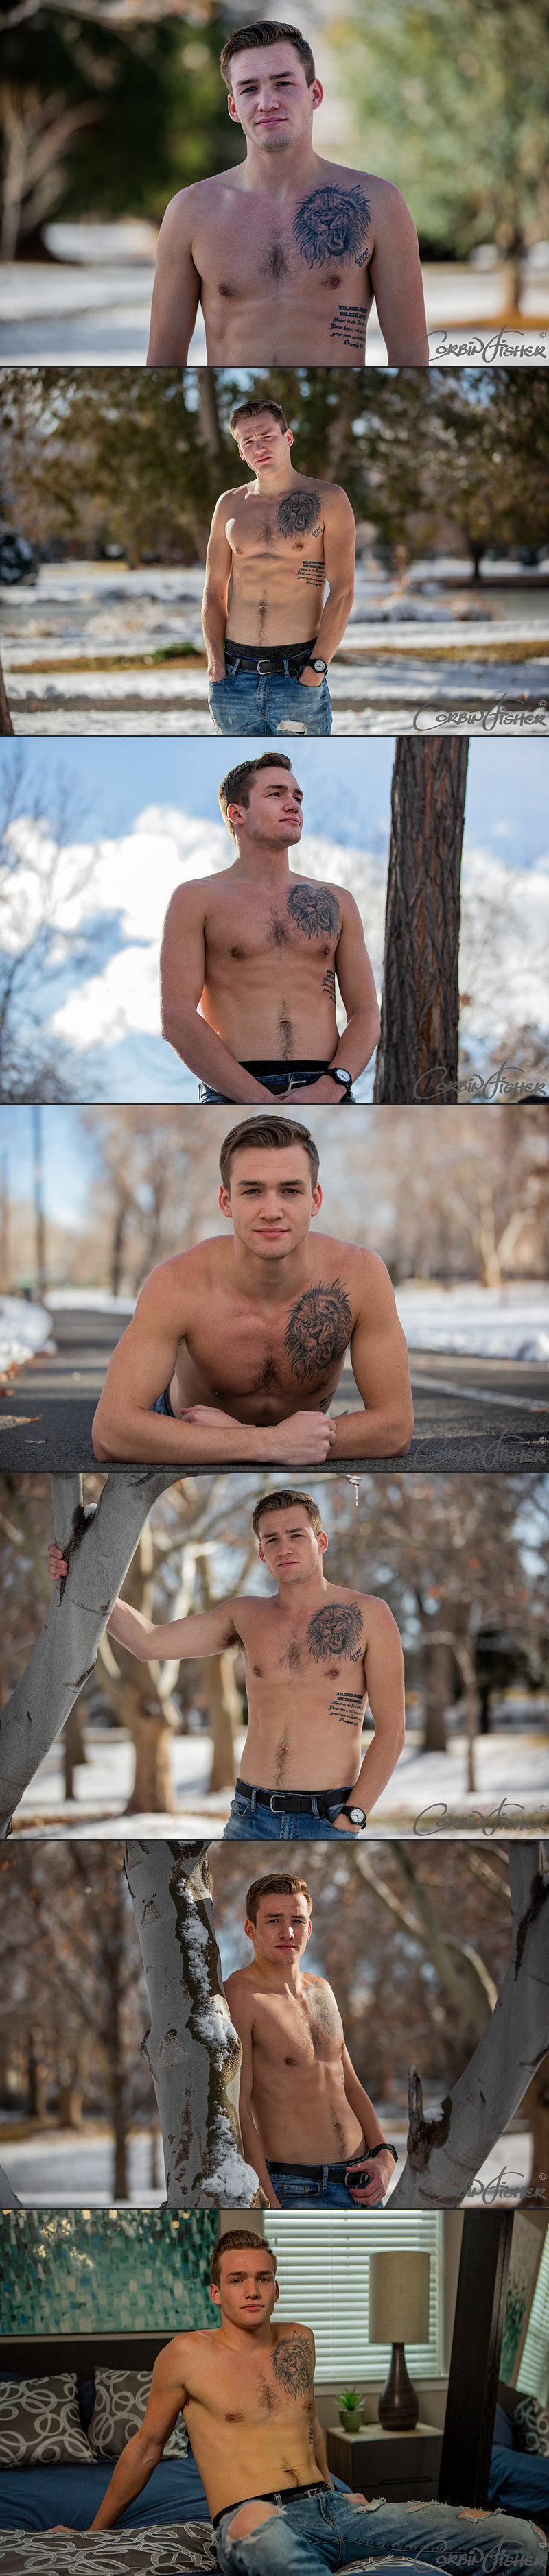 Oliver's Introductory Solo at CorbinFisher